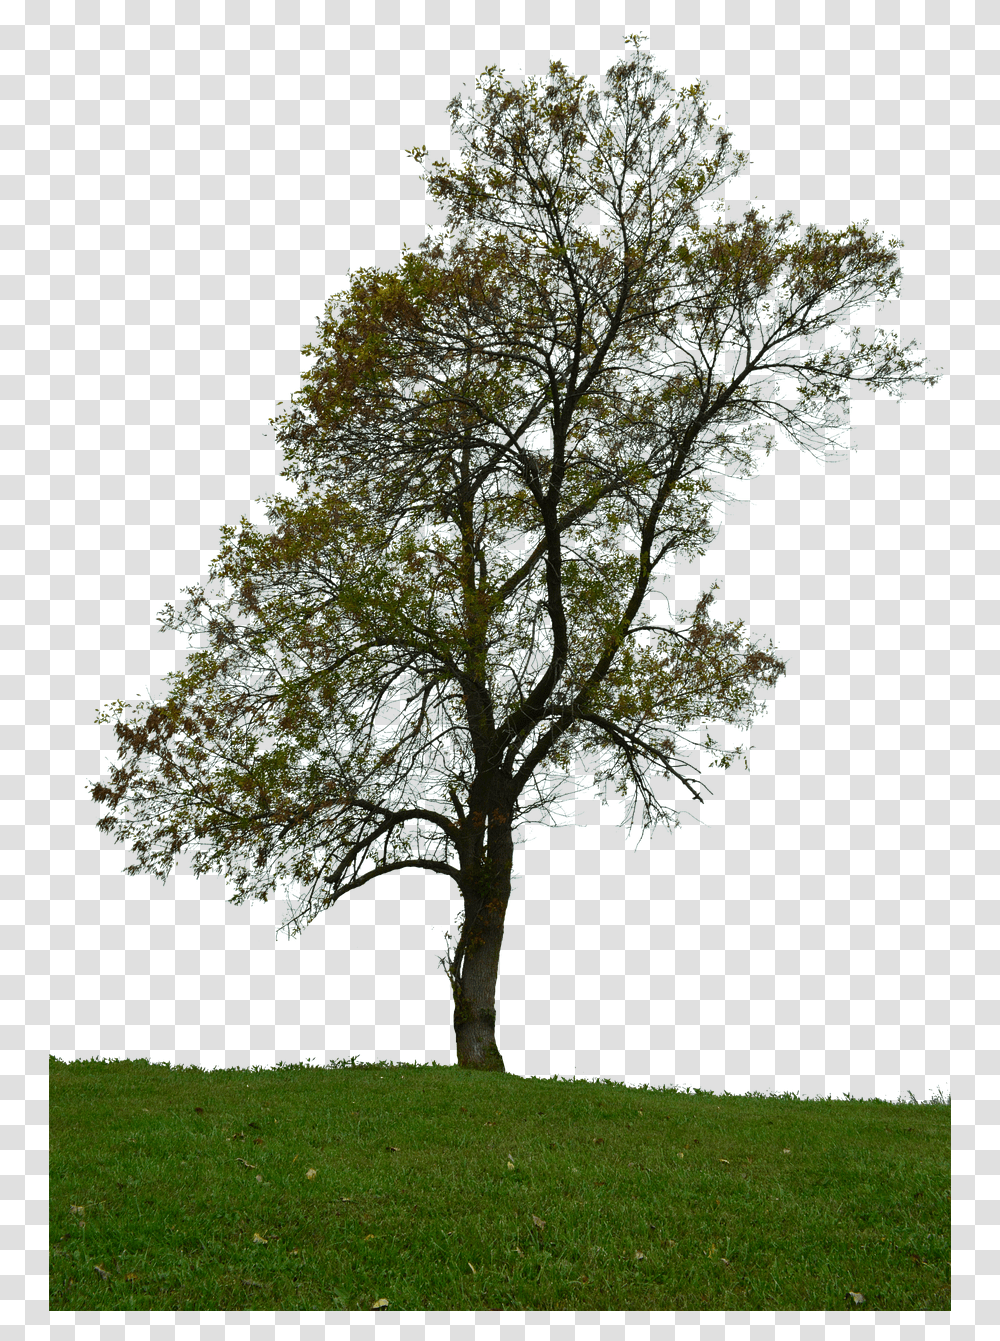 Tree With No Background Leaves Tree Plain Background, Plant, Tree Trunk, Grass, Bonsai Transparent Png